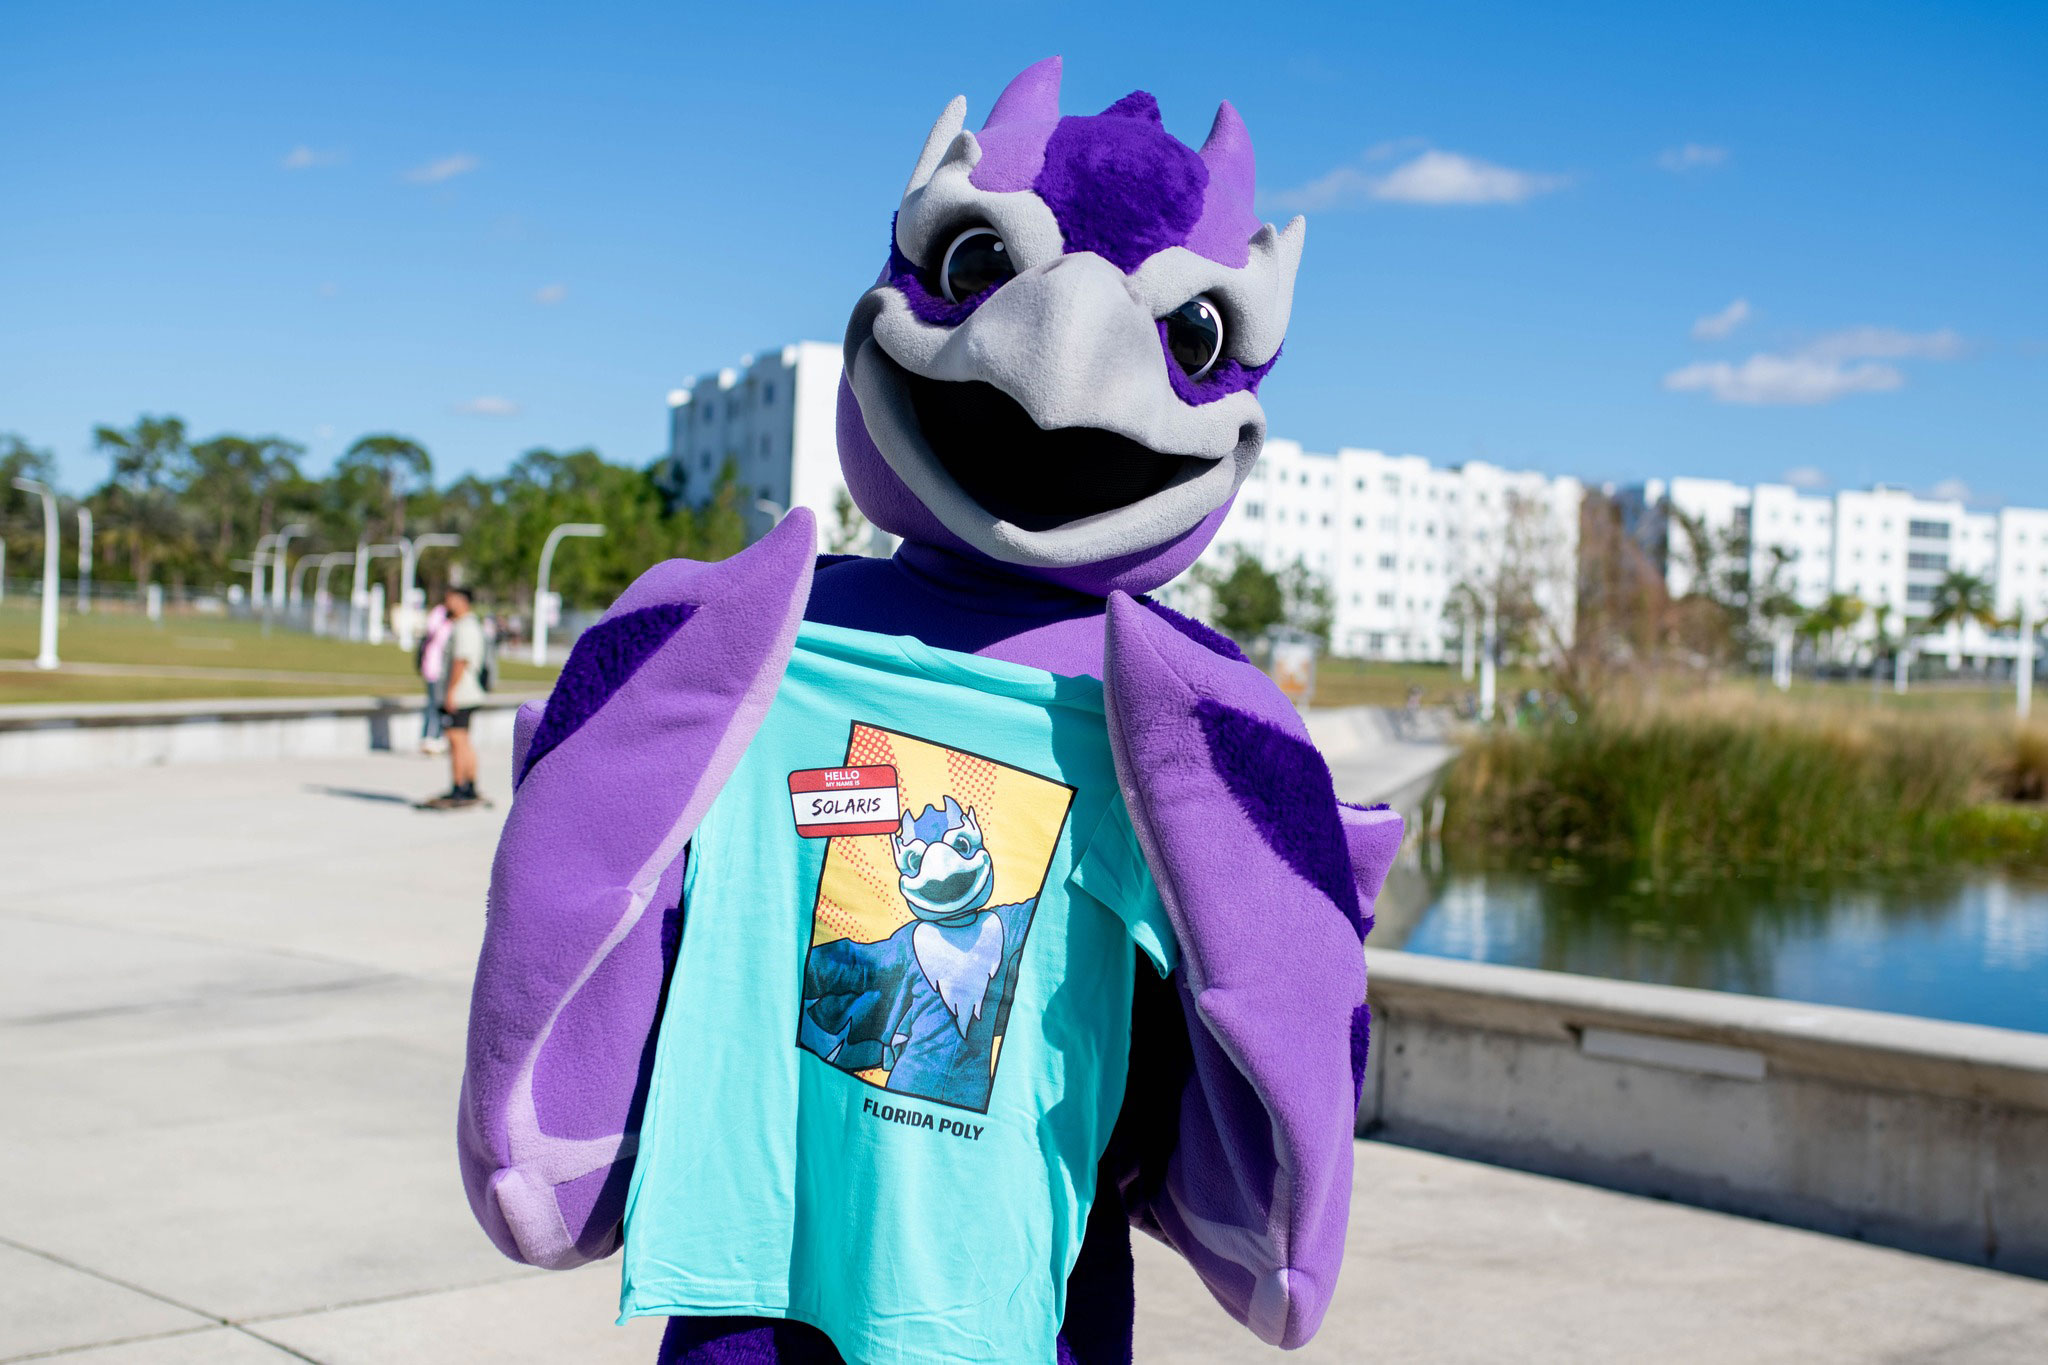 Solaris, the Florida Poly phoenix mascot, shows off a T-shirt with its likeness at a recent event to unveil its name.